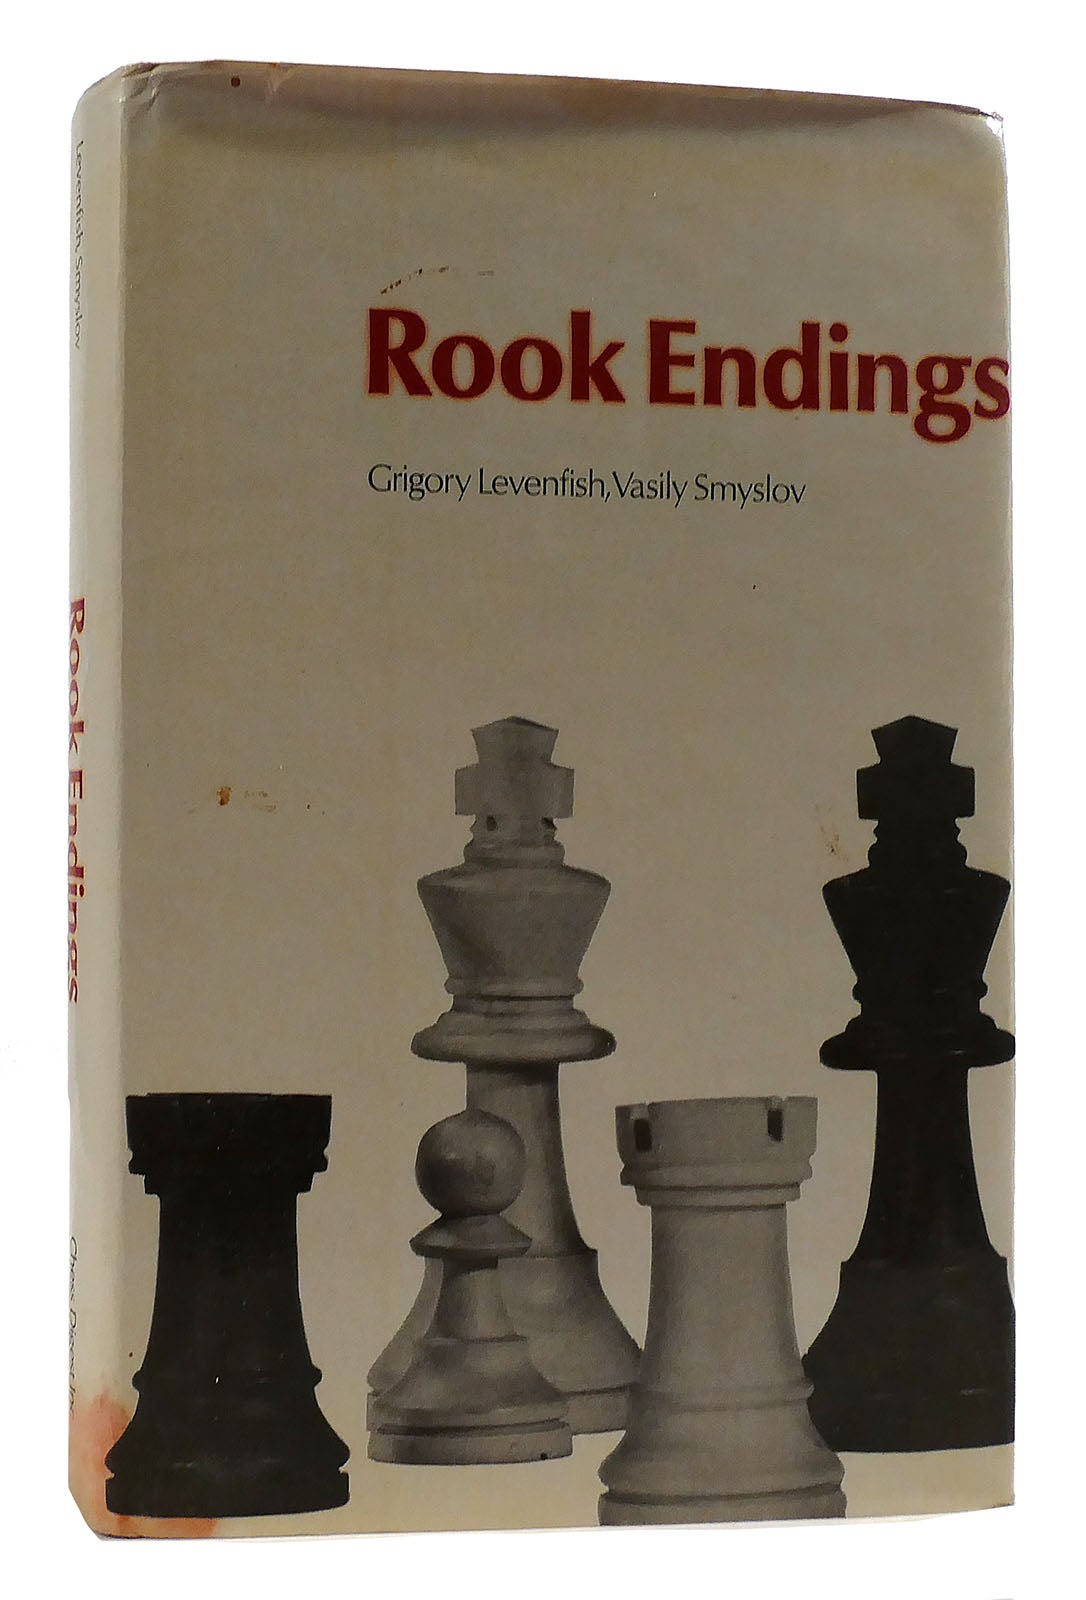 The Two Rook Endings You Must Know 